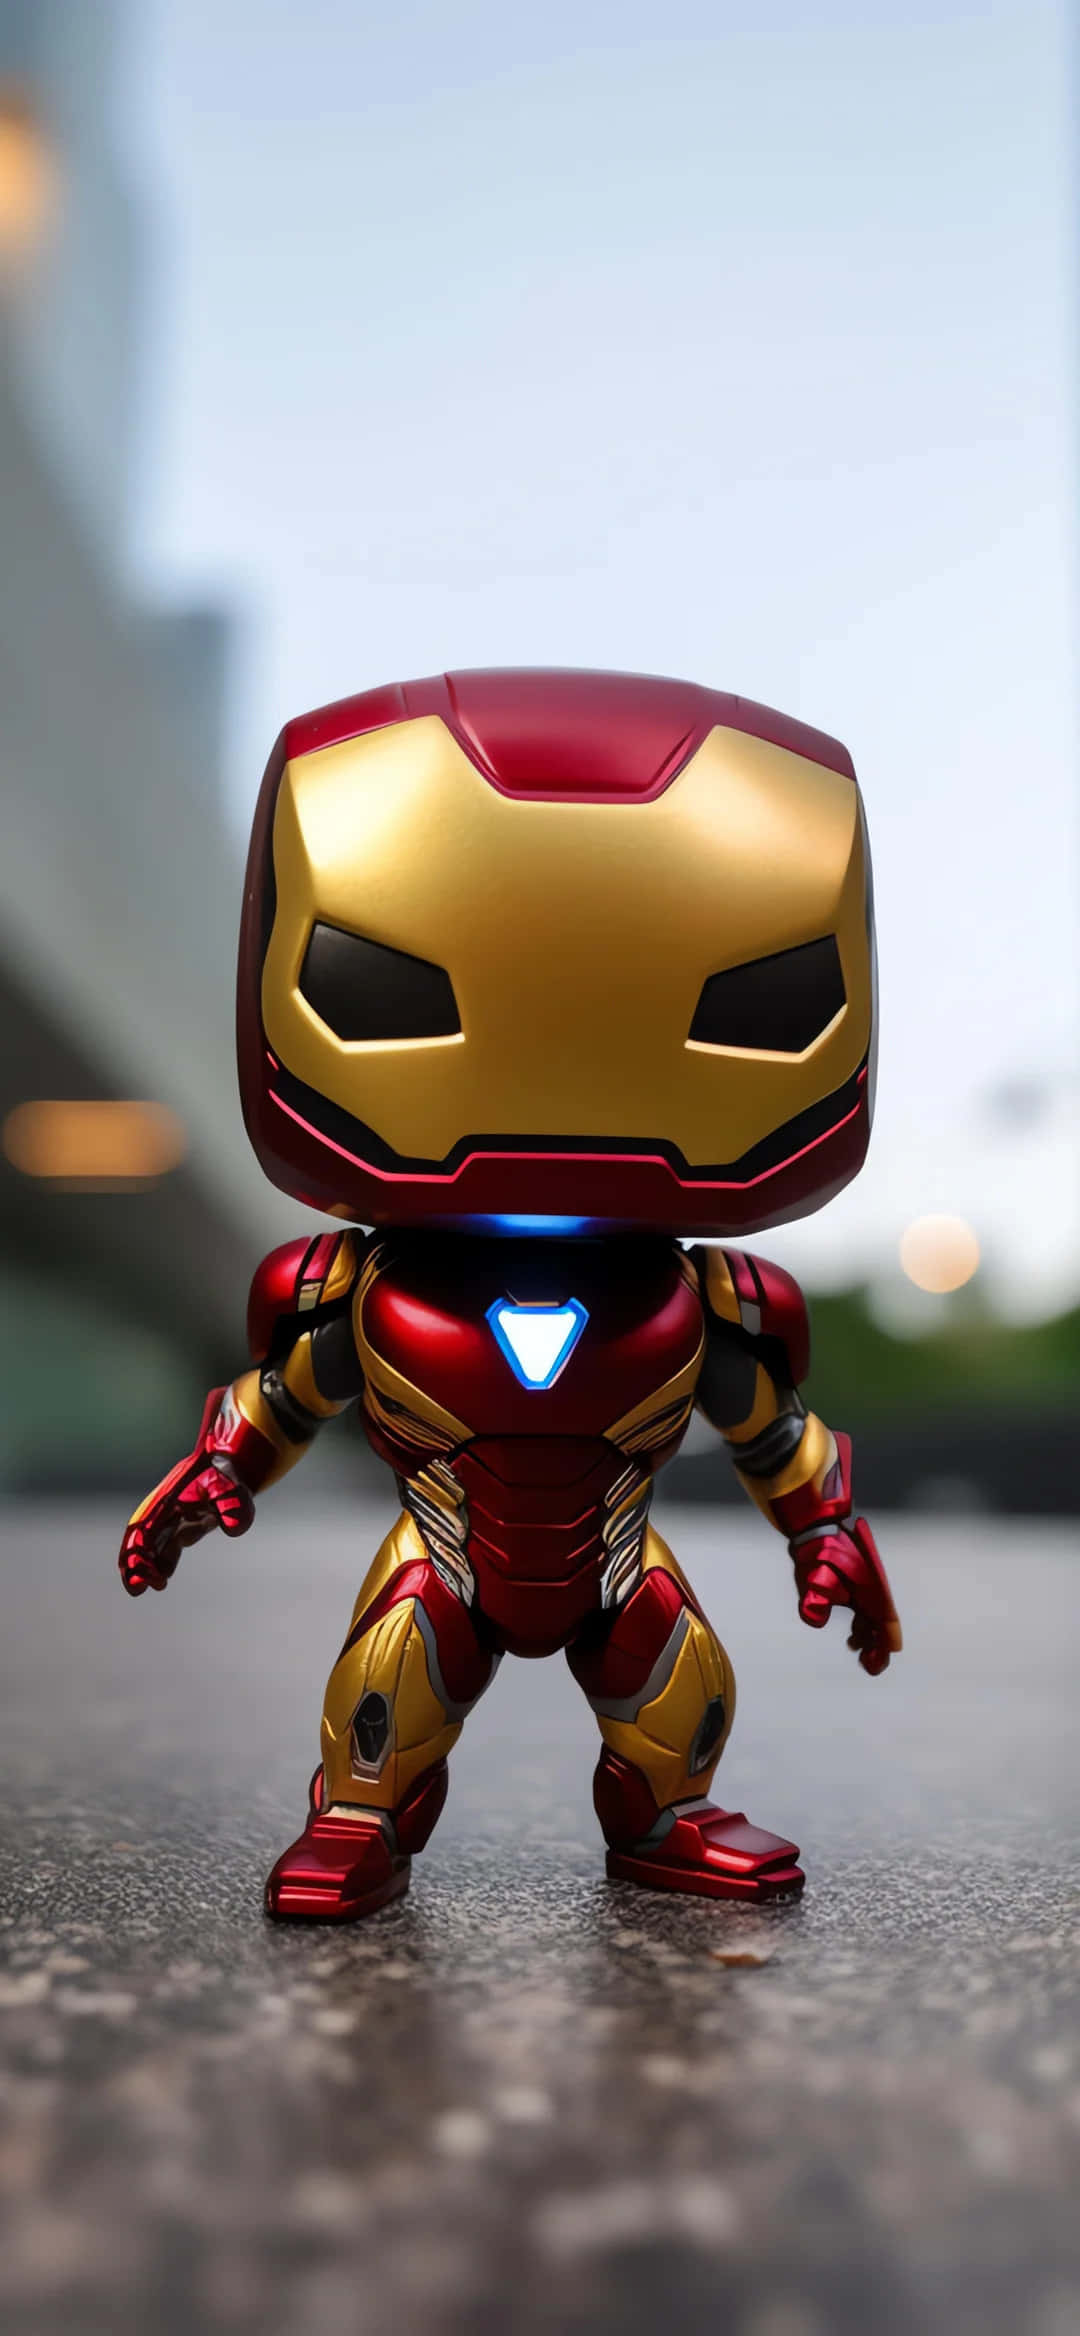 The Incredible Iron Man - Show your appreciation for the iconic Marvel character with the Iron Man Pop Figures. Wallpaper